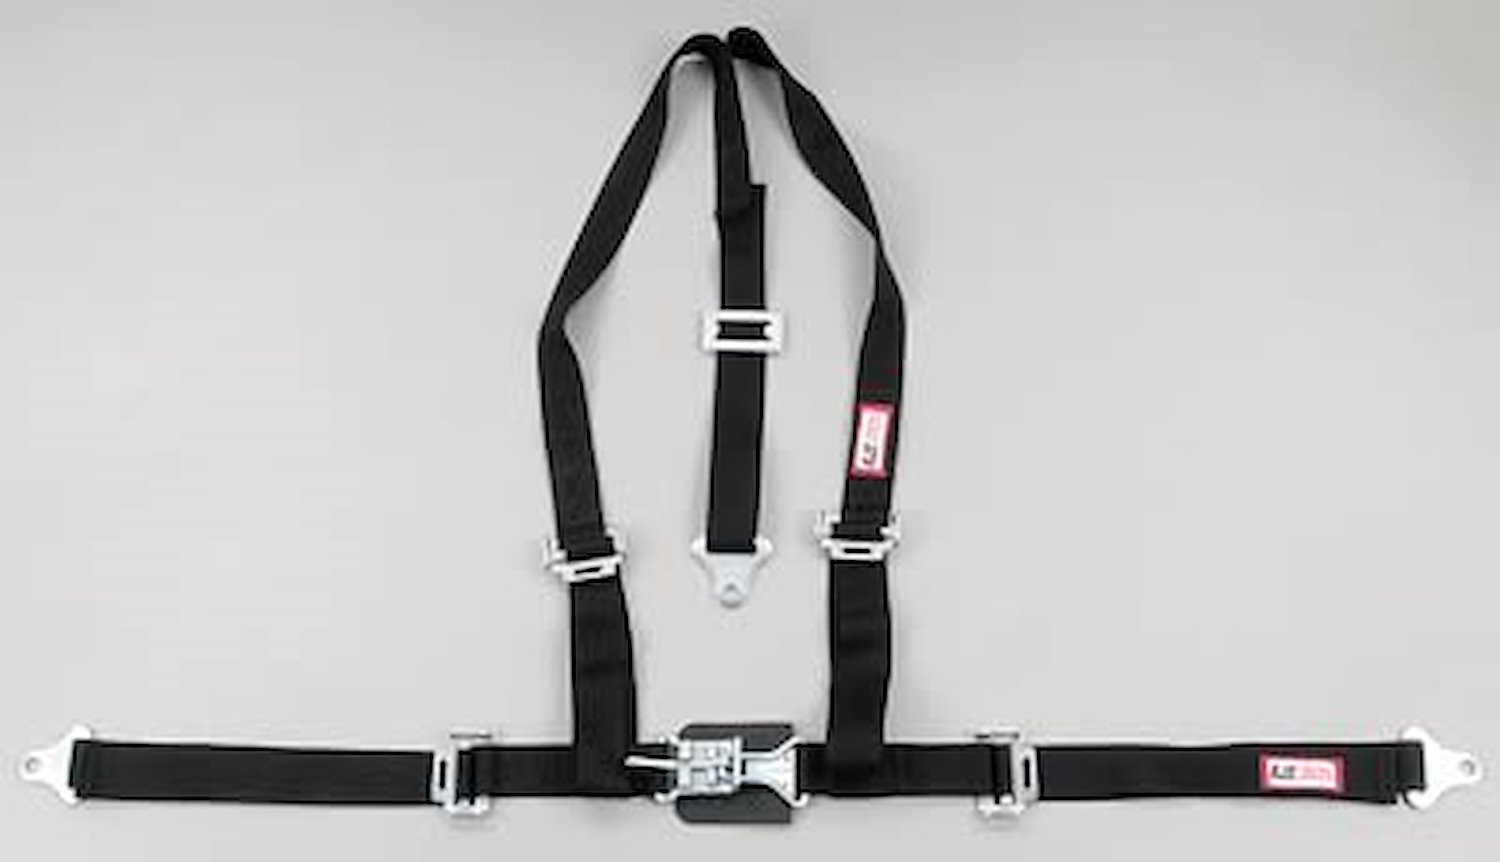 NON-SFI L&L HARNESS 3 PULL UP Lap BELT SNAP SEWN IN 2 S.H. Y FLOOR Mount WRAP/SNAP YELLOW